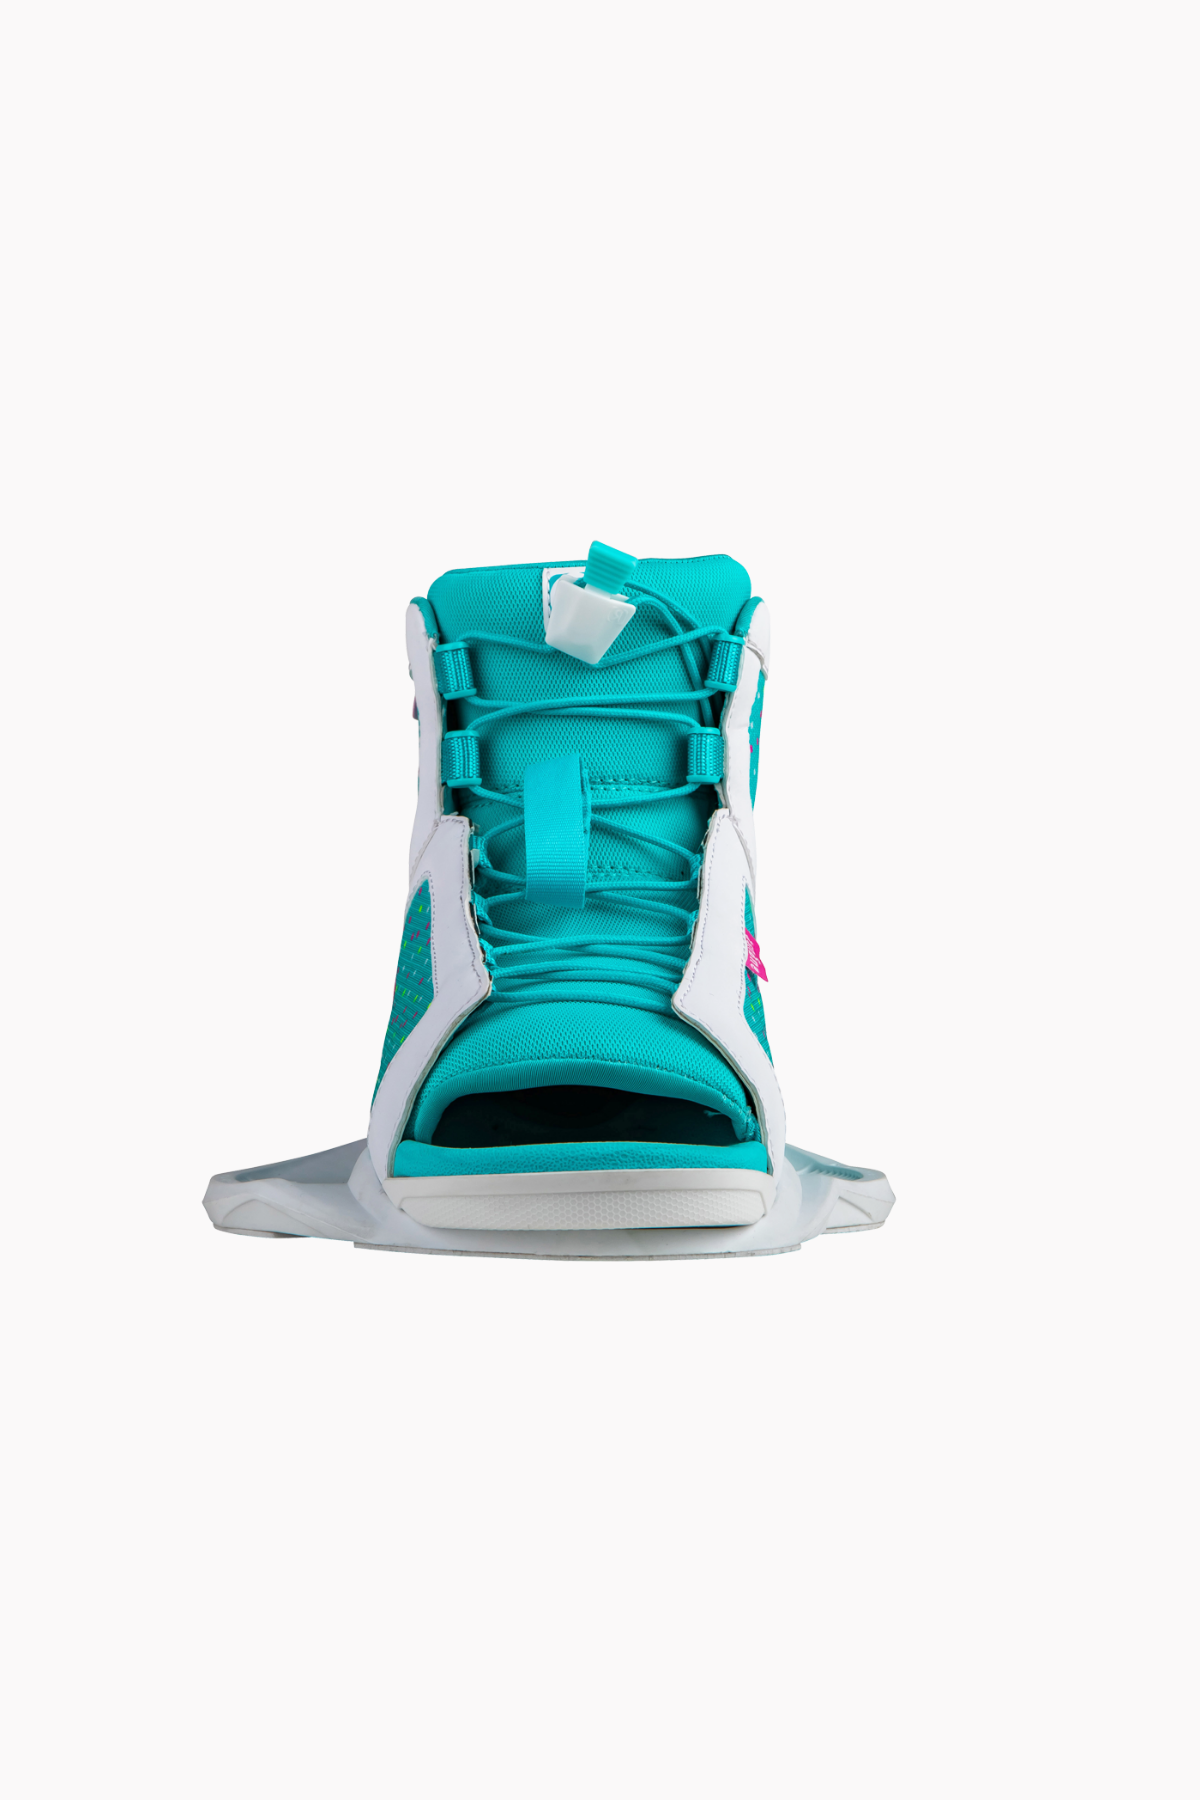 Ronix August Kids Wakeboard Boot - Cottage Toys Canada - Peterborough - Ontario - Canada